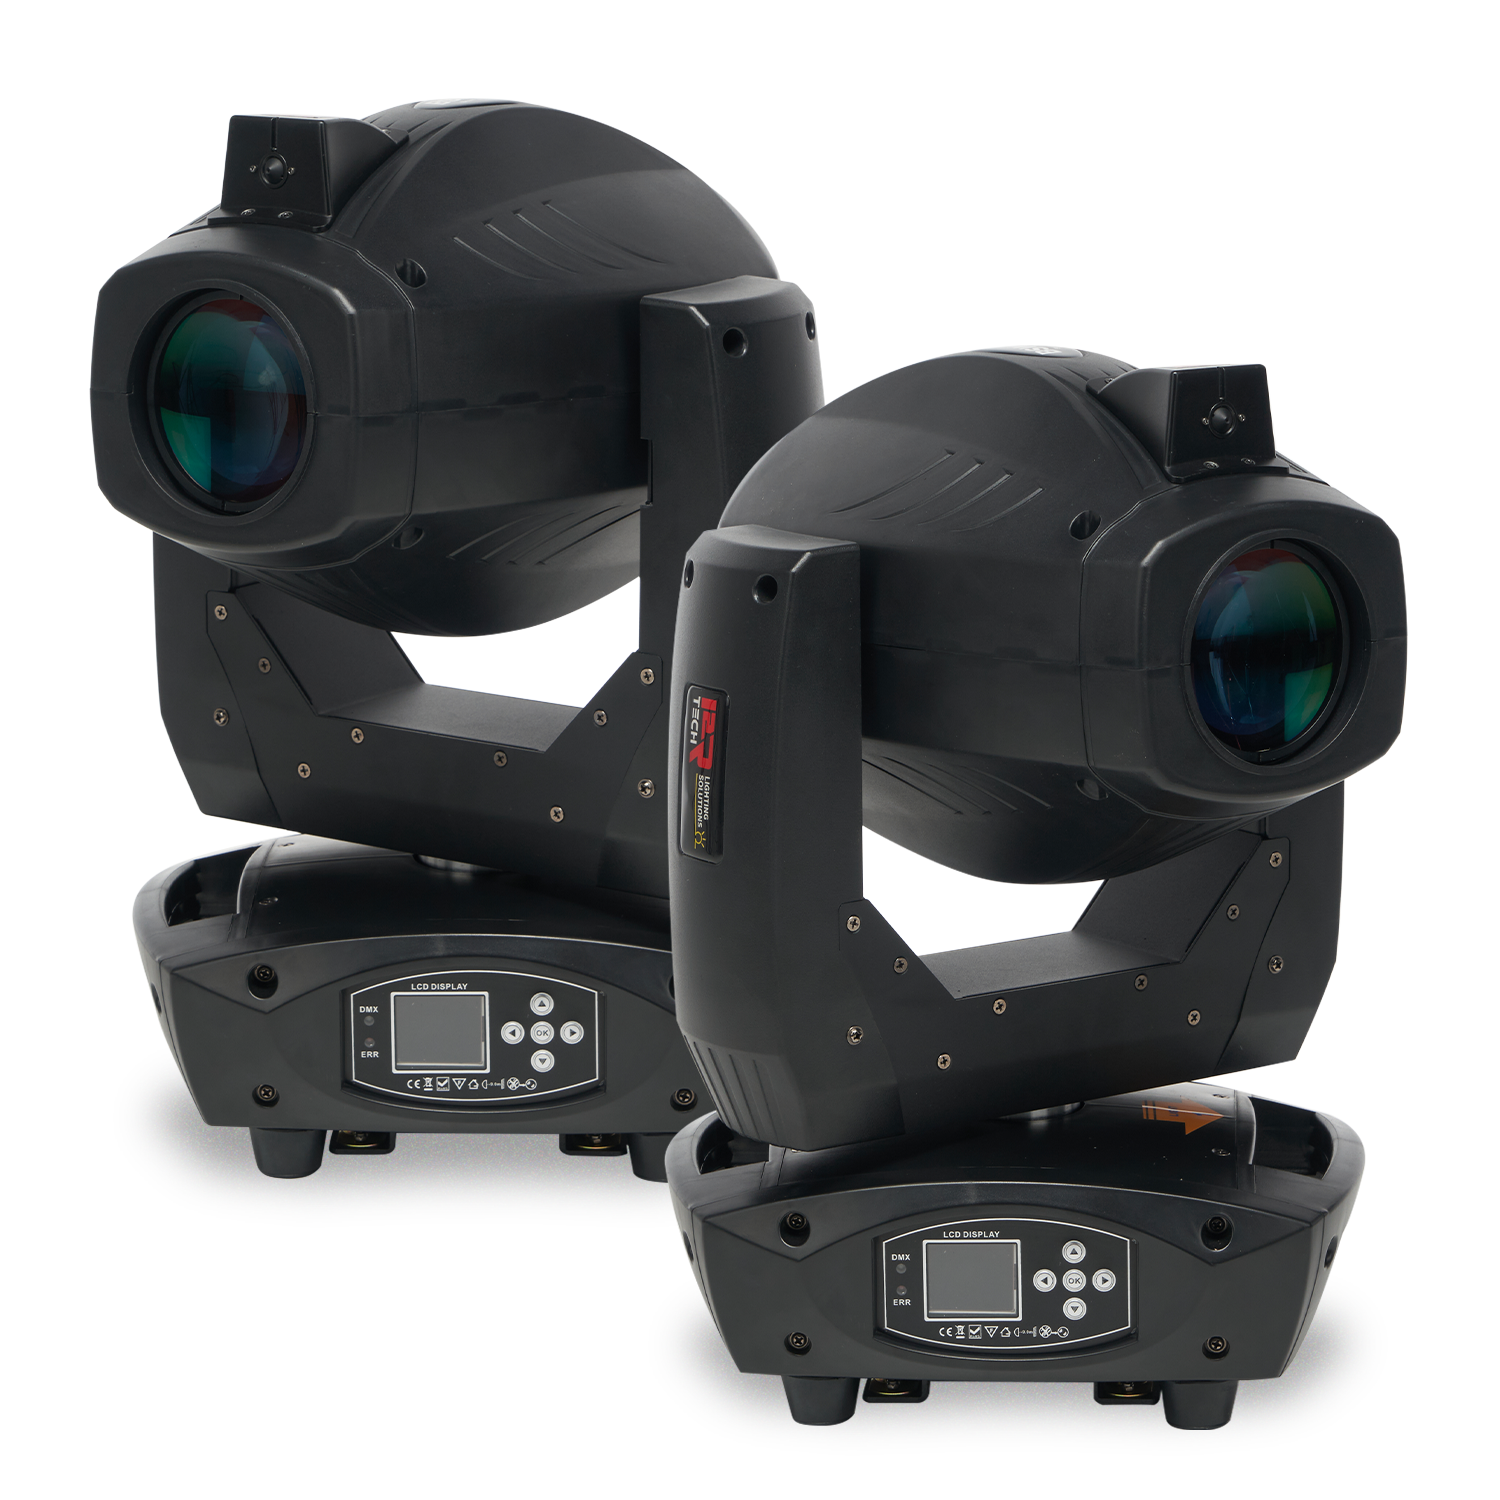 Twin Lights, Complete Plug-and-Play Followspot System, all Wireless Controlled!